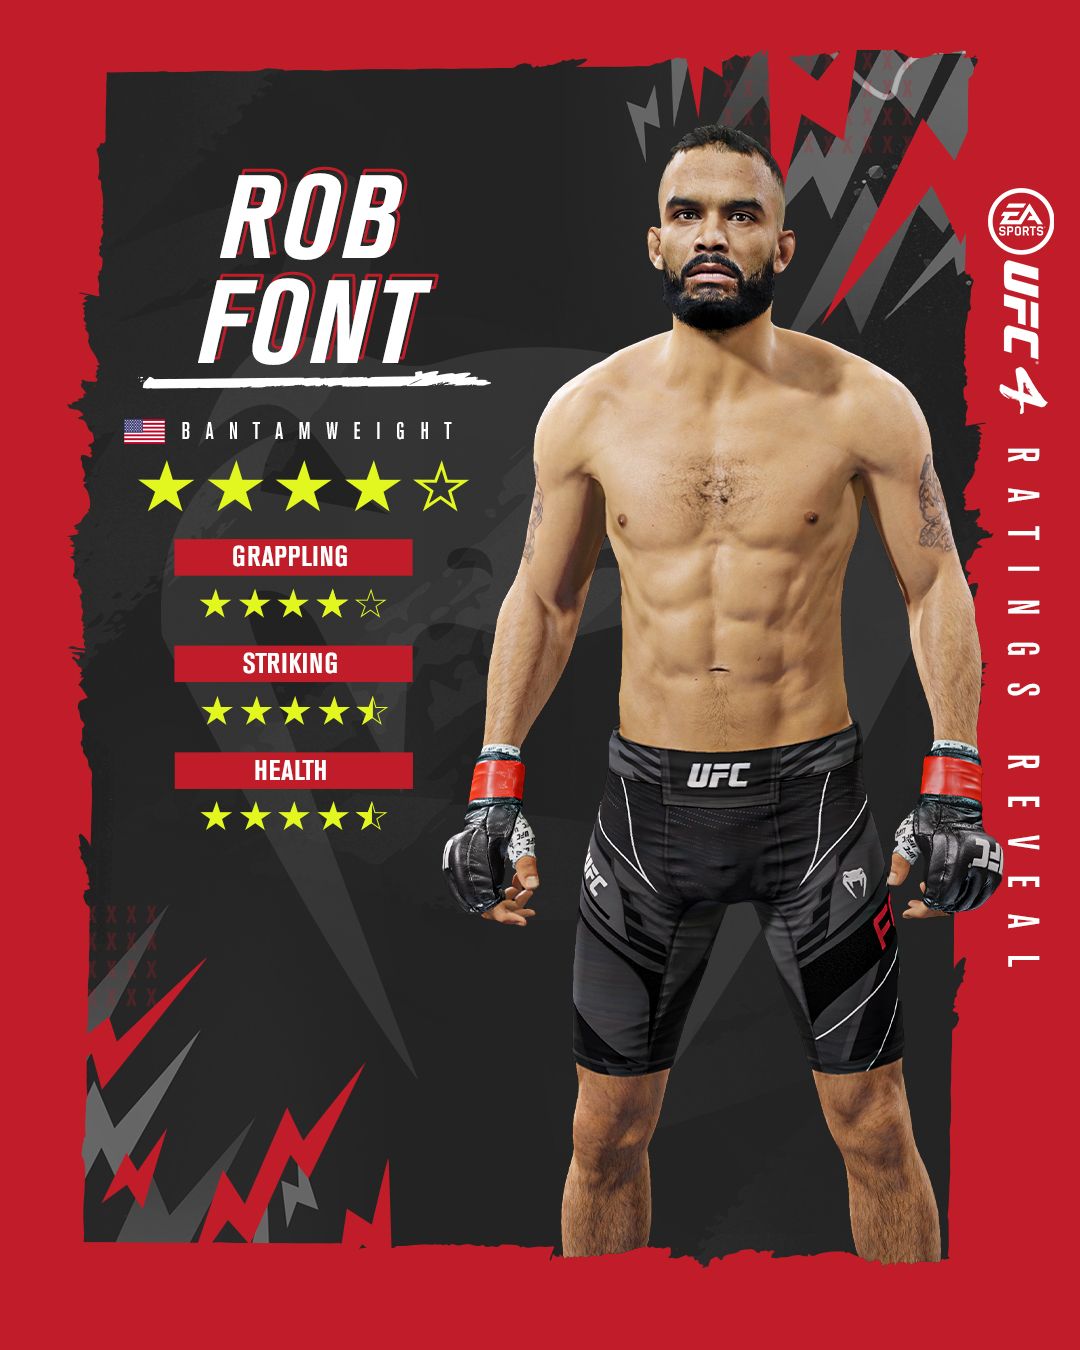 FOUR STAR FONT: The UFC veteran joins the game with a 4-Star Overall Rating